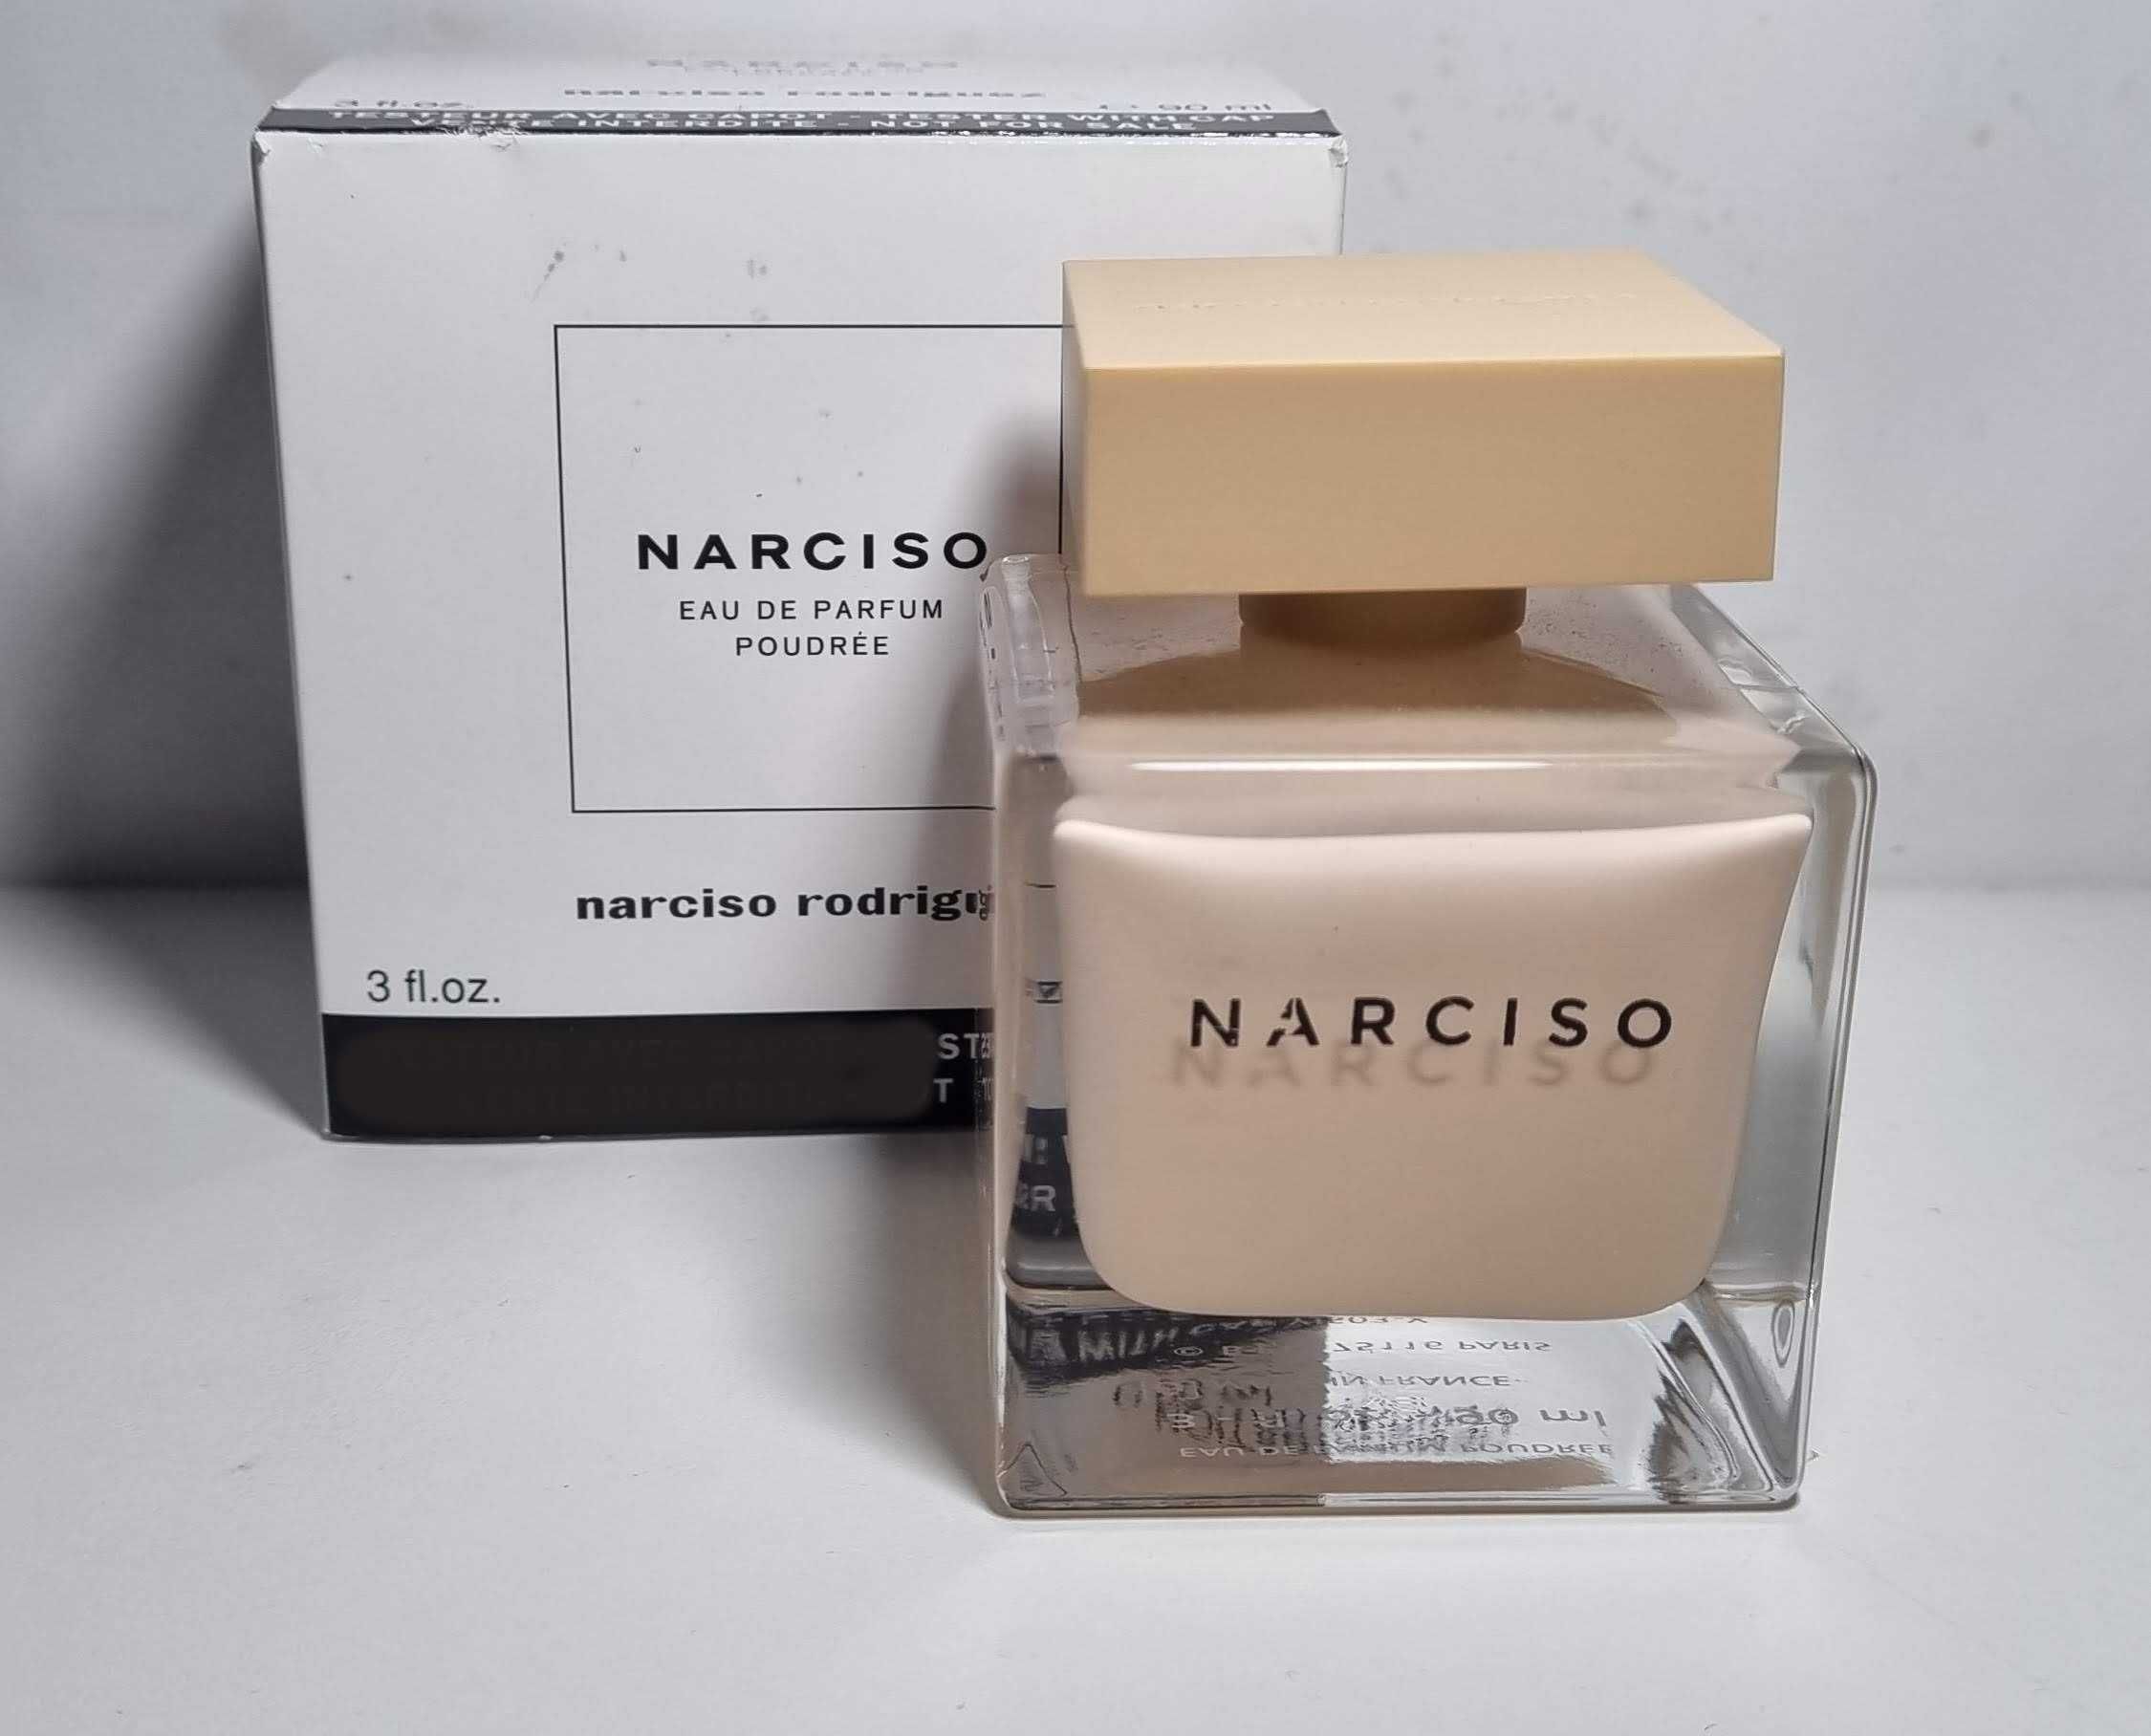 Parfum Narciso Rodriguez - Pure Musc, For Her, Poudree, Ambree, dama